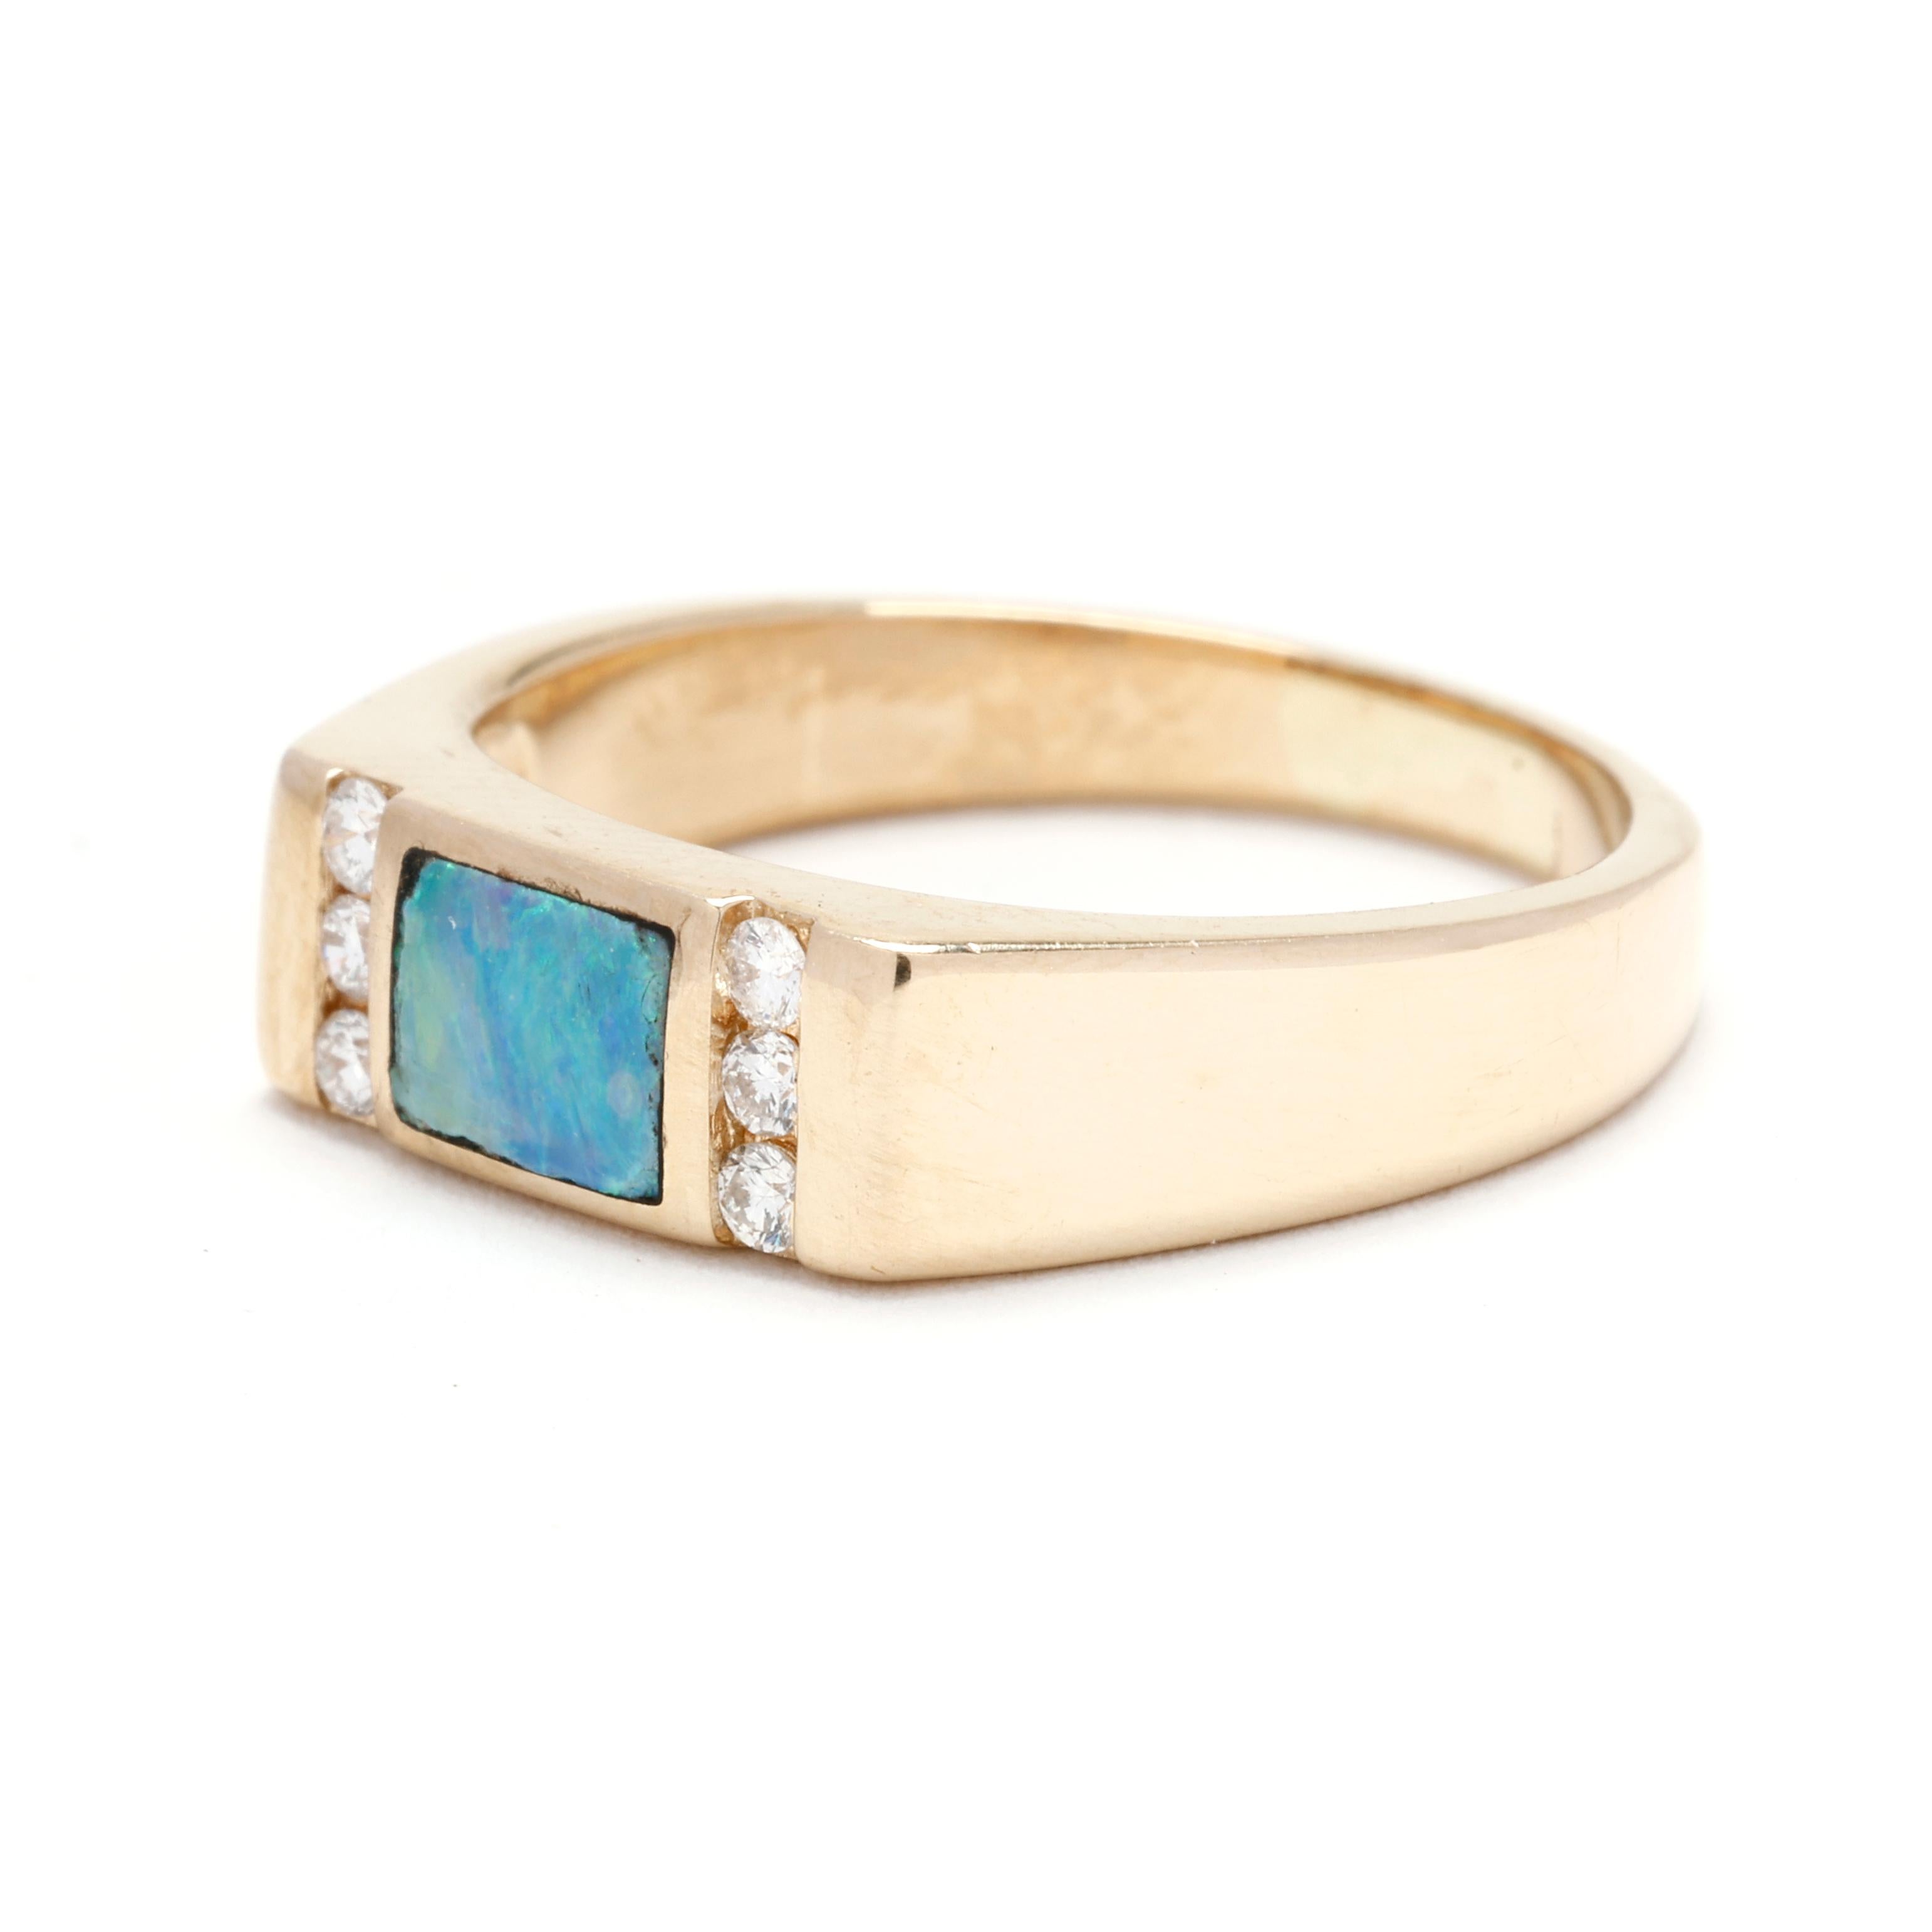 Rainbow Opal and Diamond Rectangular Band Ring, 14k Yellow Gold, Ring Size 6.75 In Good Condition For Sale In McLeansville, NC